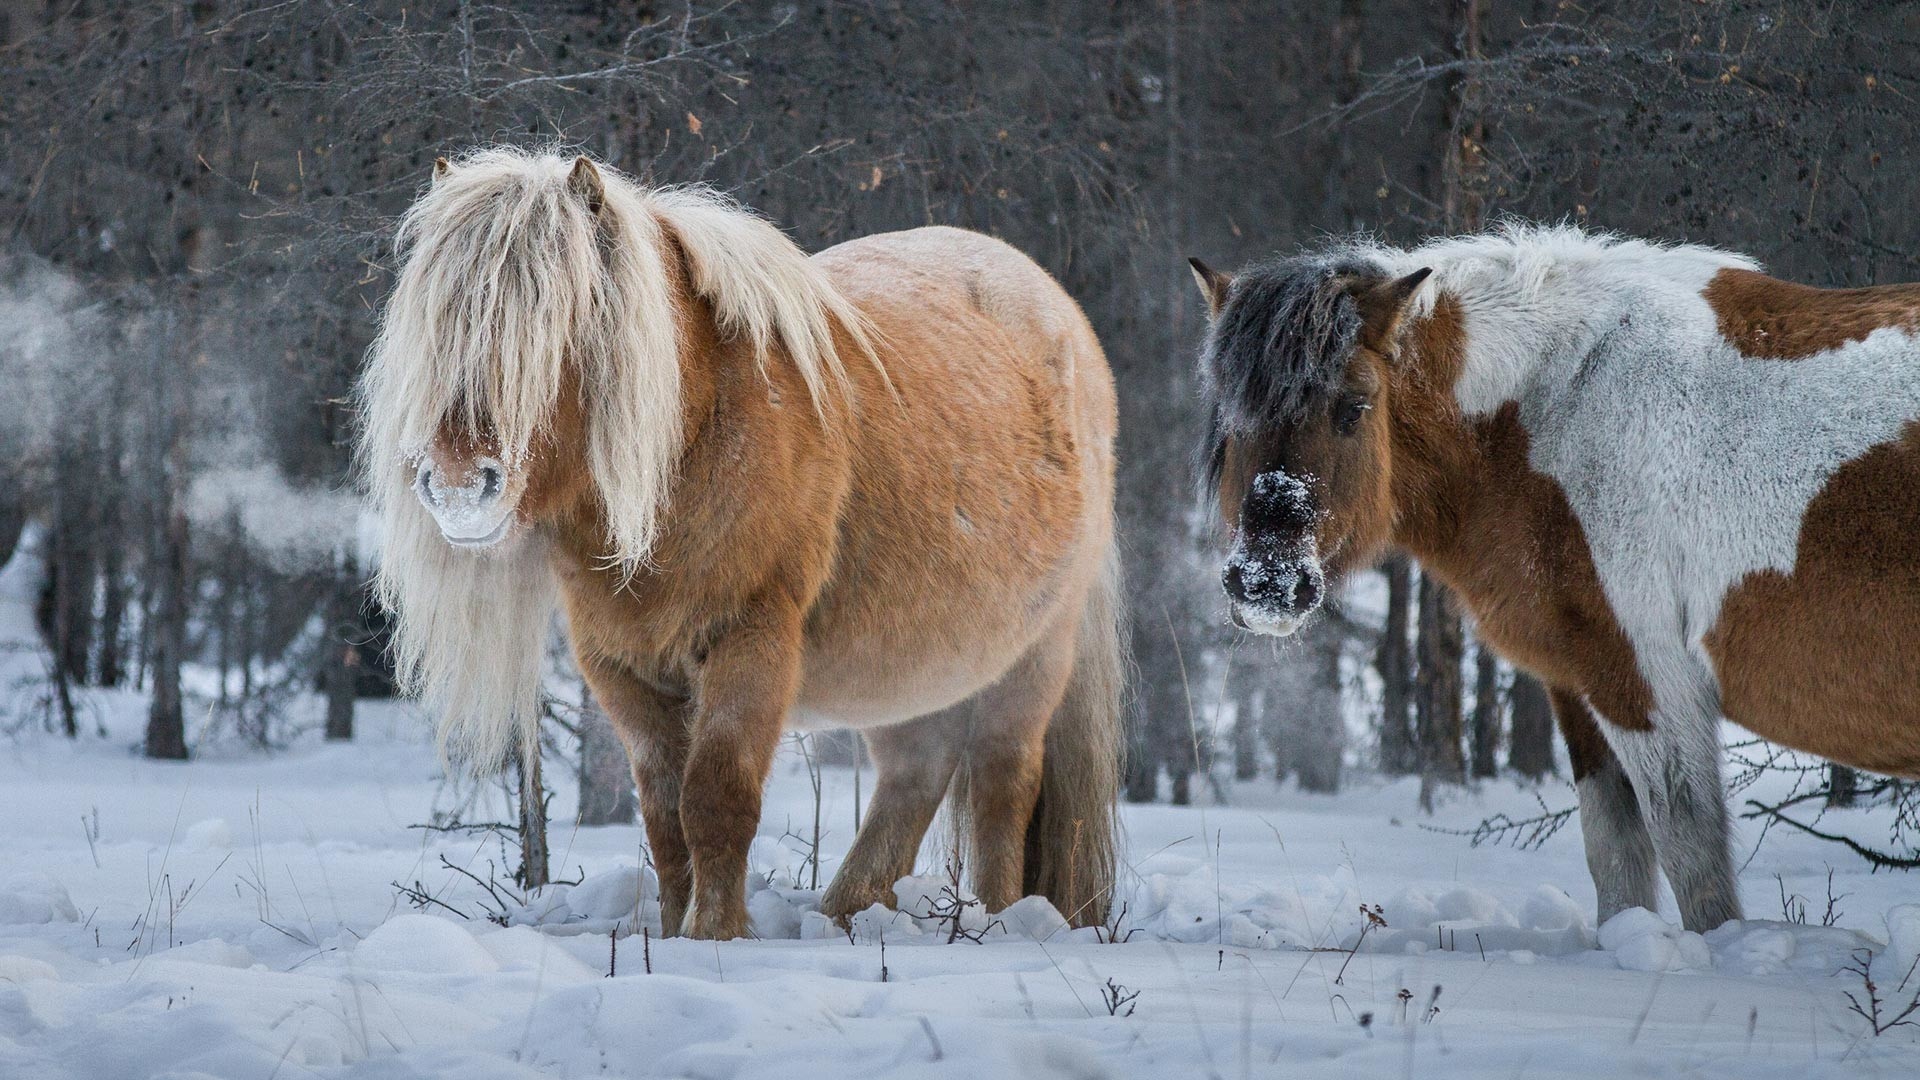 Frost-resistant horses, Yakutia's resilient breed, Extreme winter conditions, Nature's adaptability, 1920x1080 Full HD Desktop